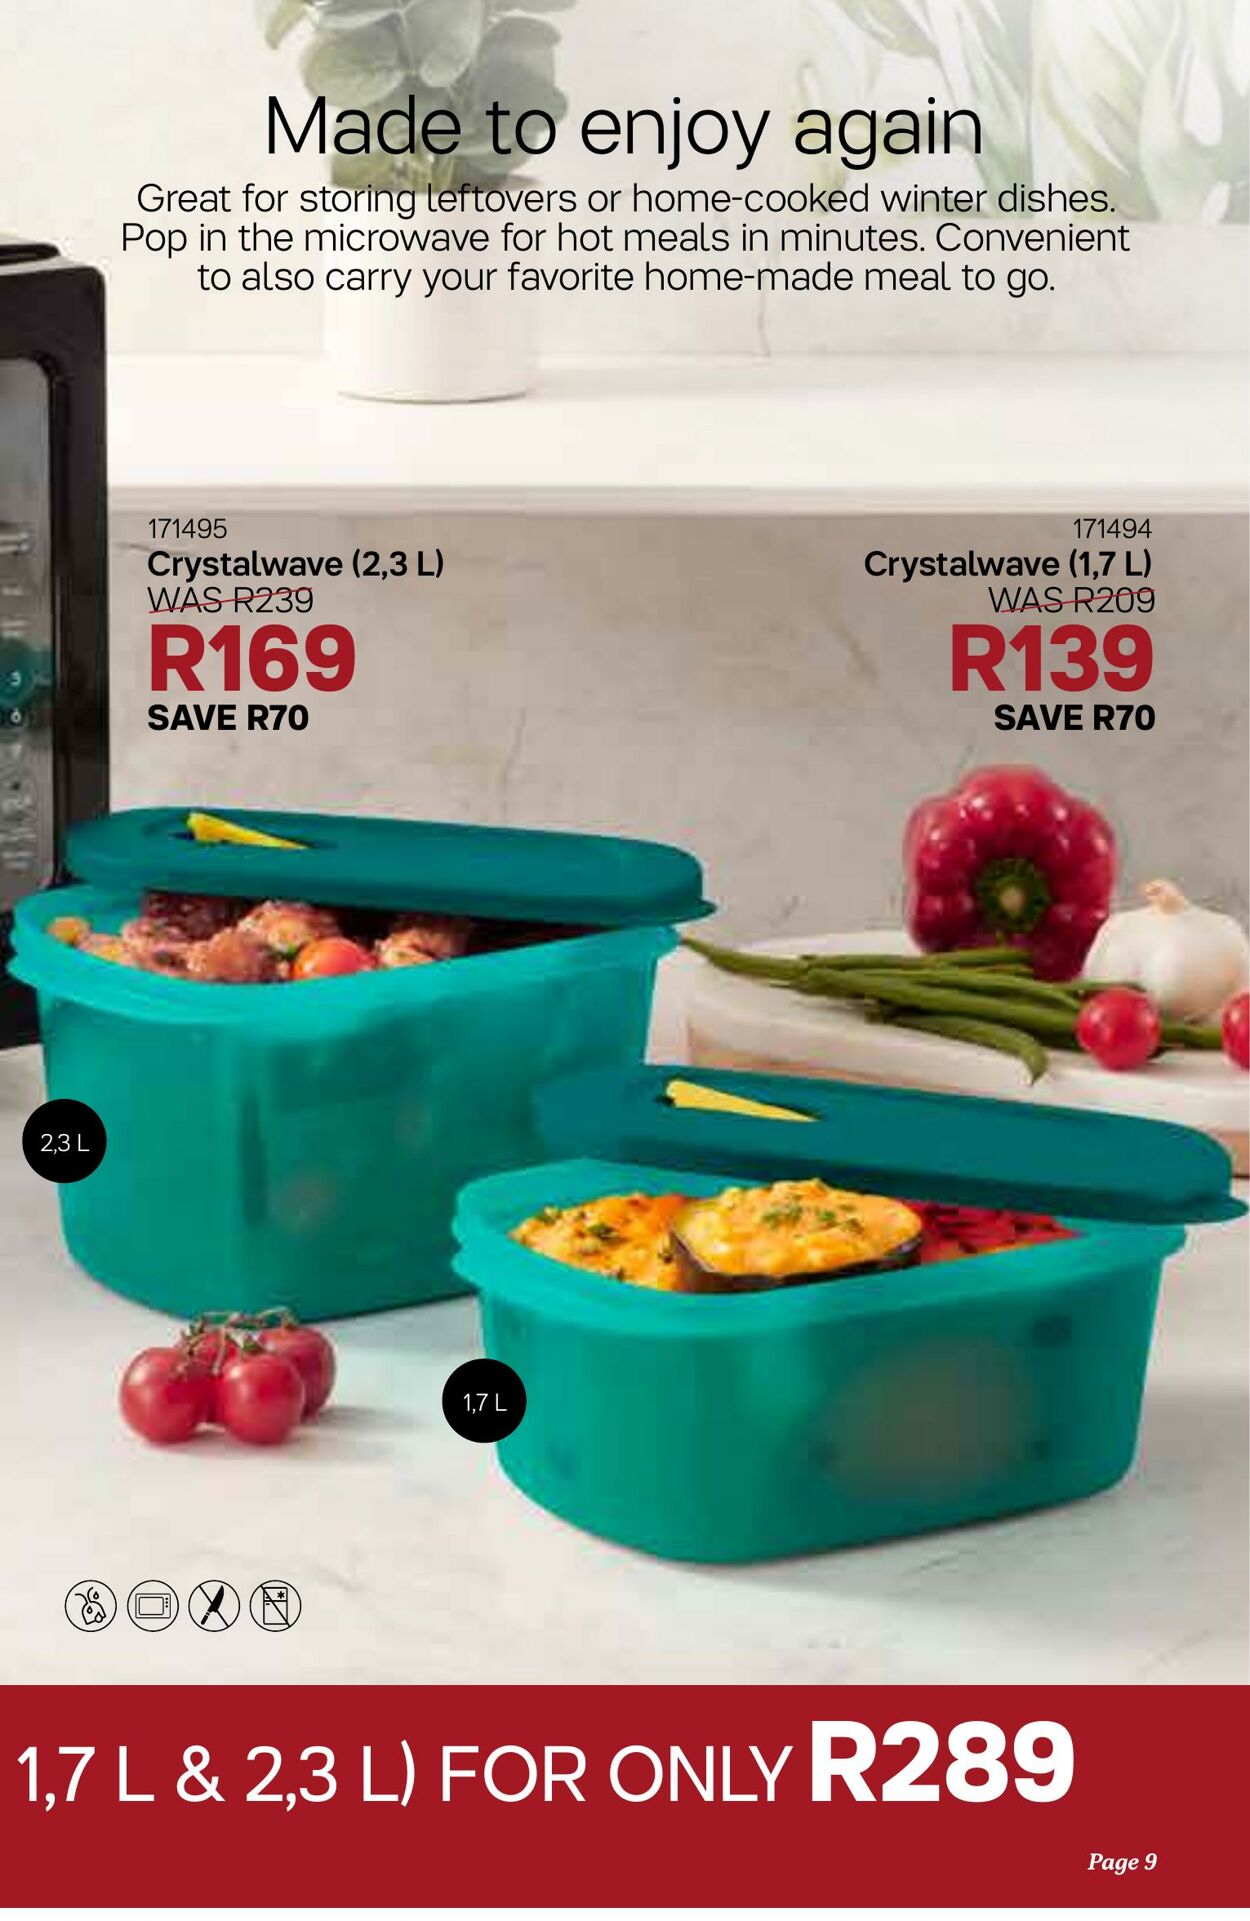 https://static.za-specials.com/images/promotions/tupperware/share-the-warmth-rsa-34c67b3c40/d67d584d80db.jpg